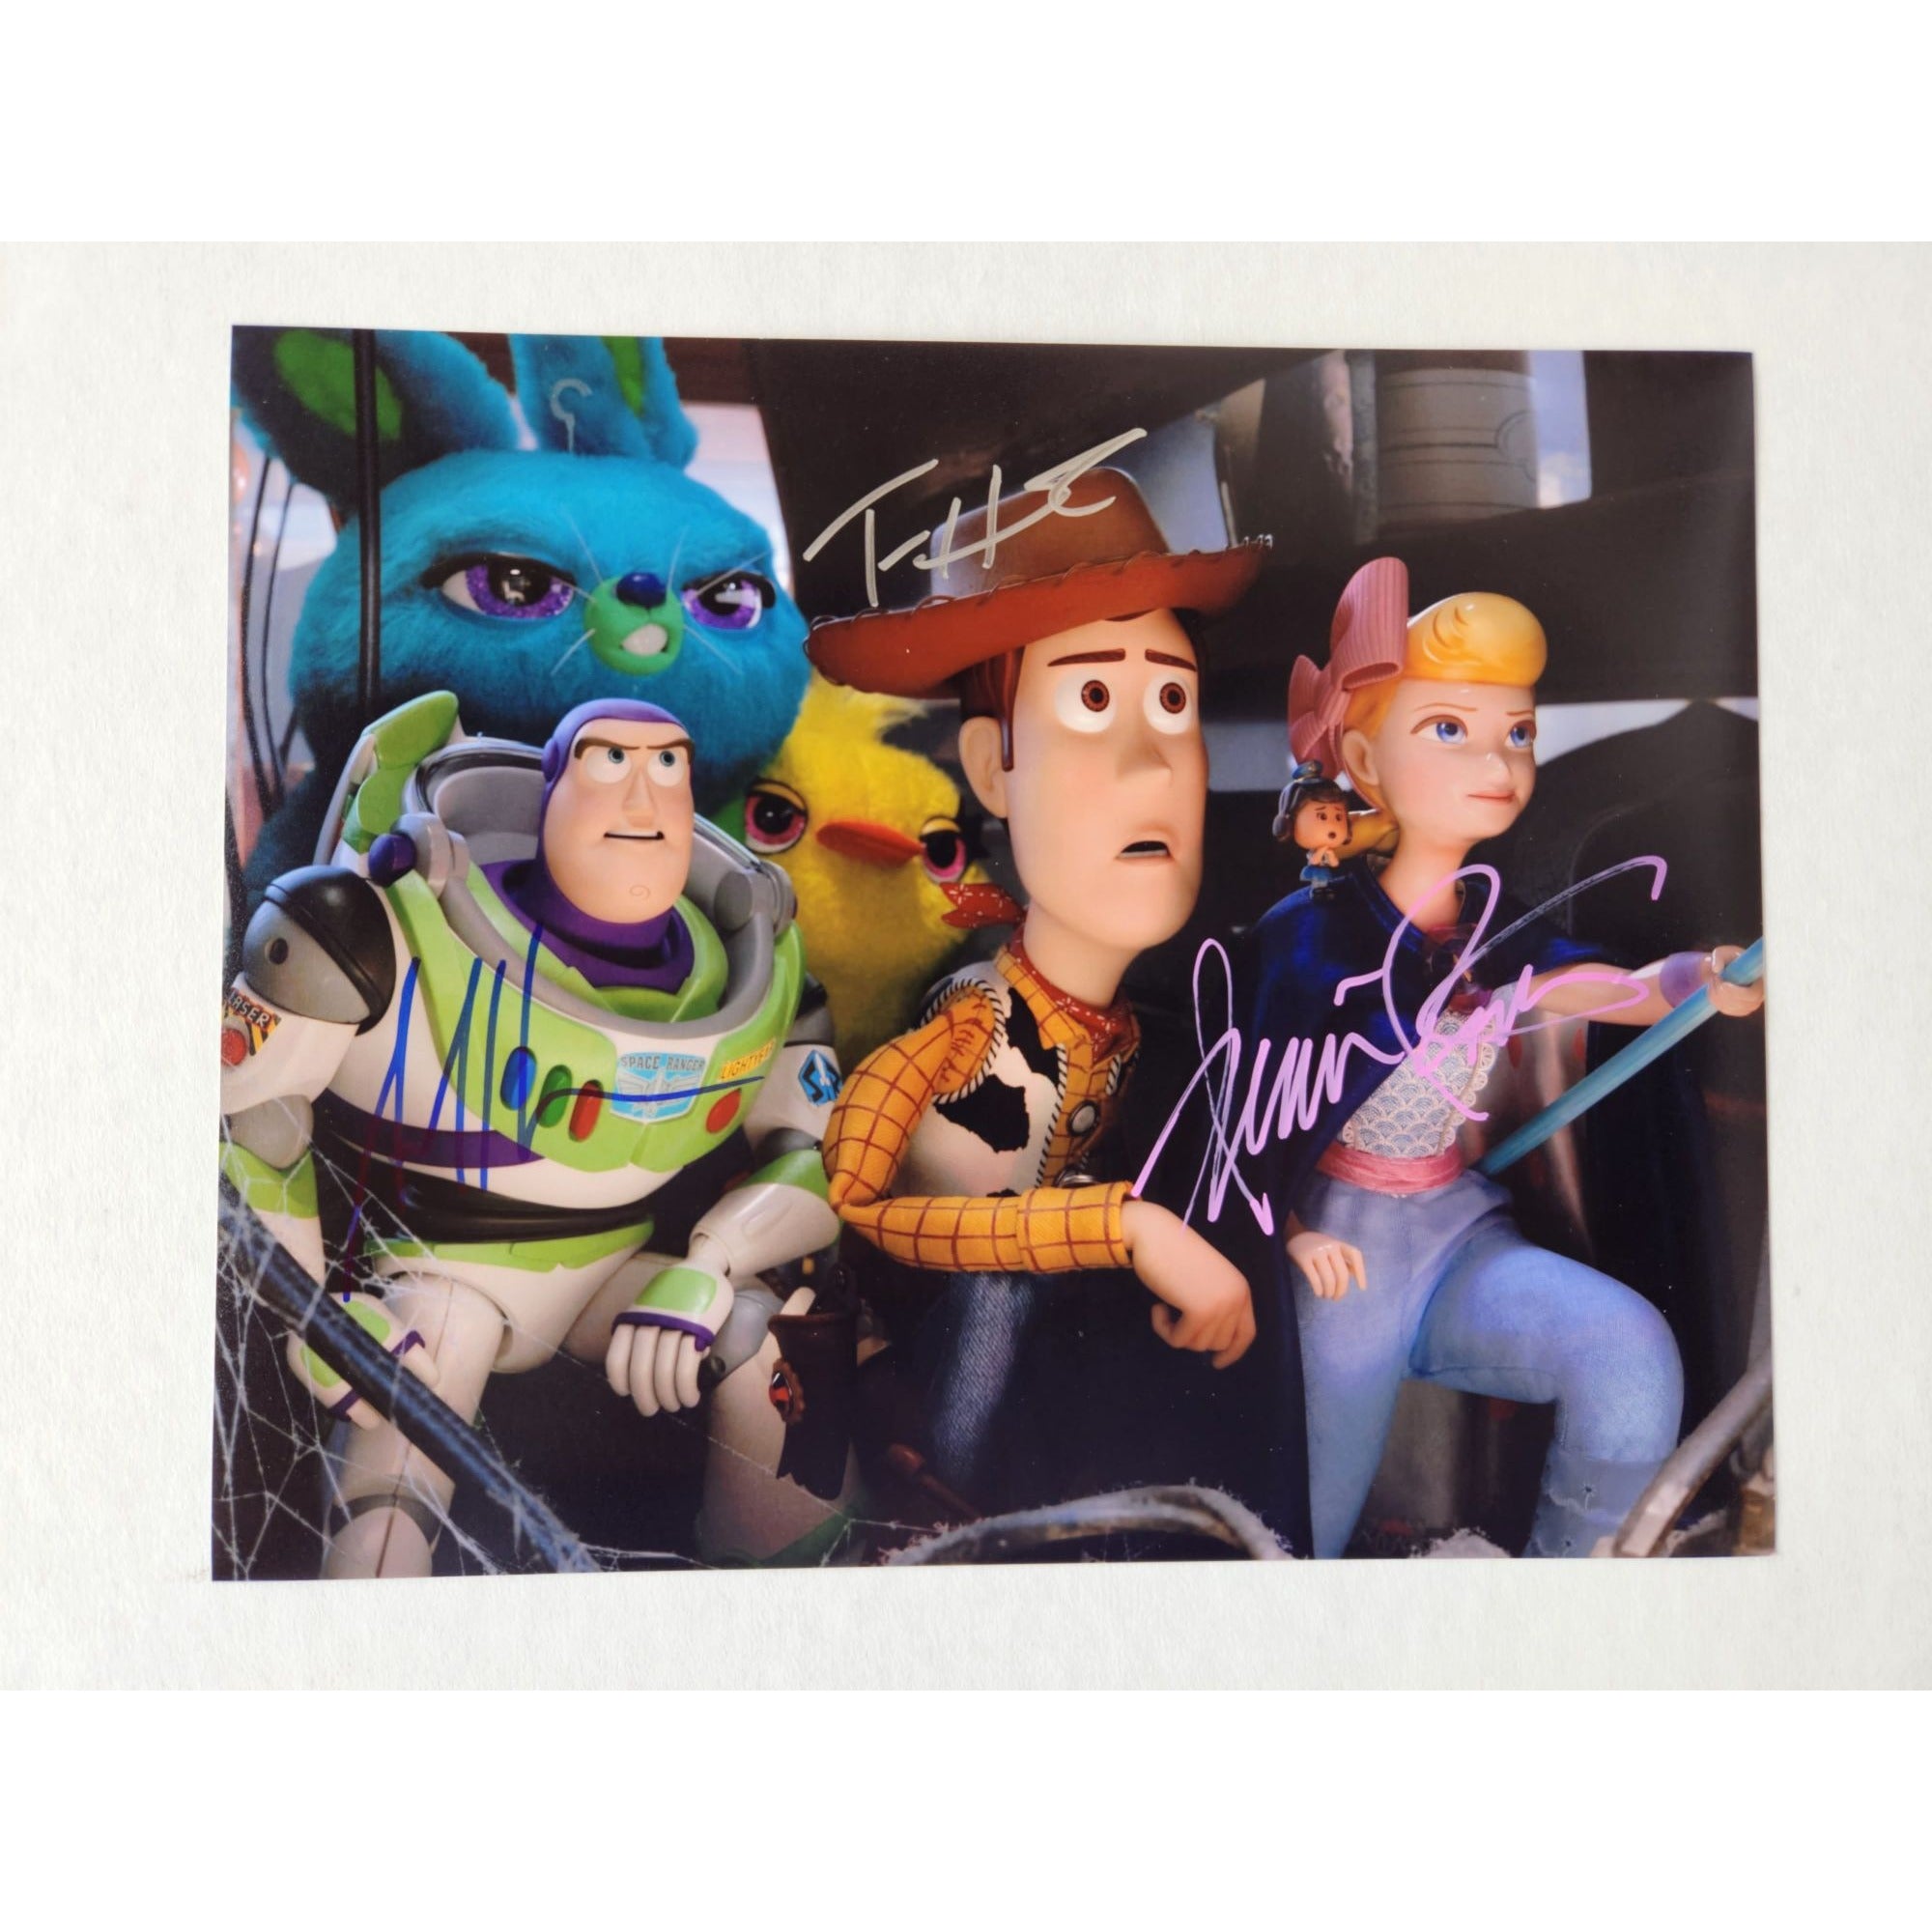 Toy Story Tom Hanks "Woody" Tim Allen "Buzz Lightyear" Annie Potts "Bo Peep" 8x10 photo signed with proof